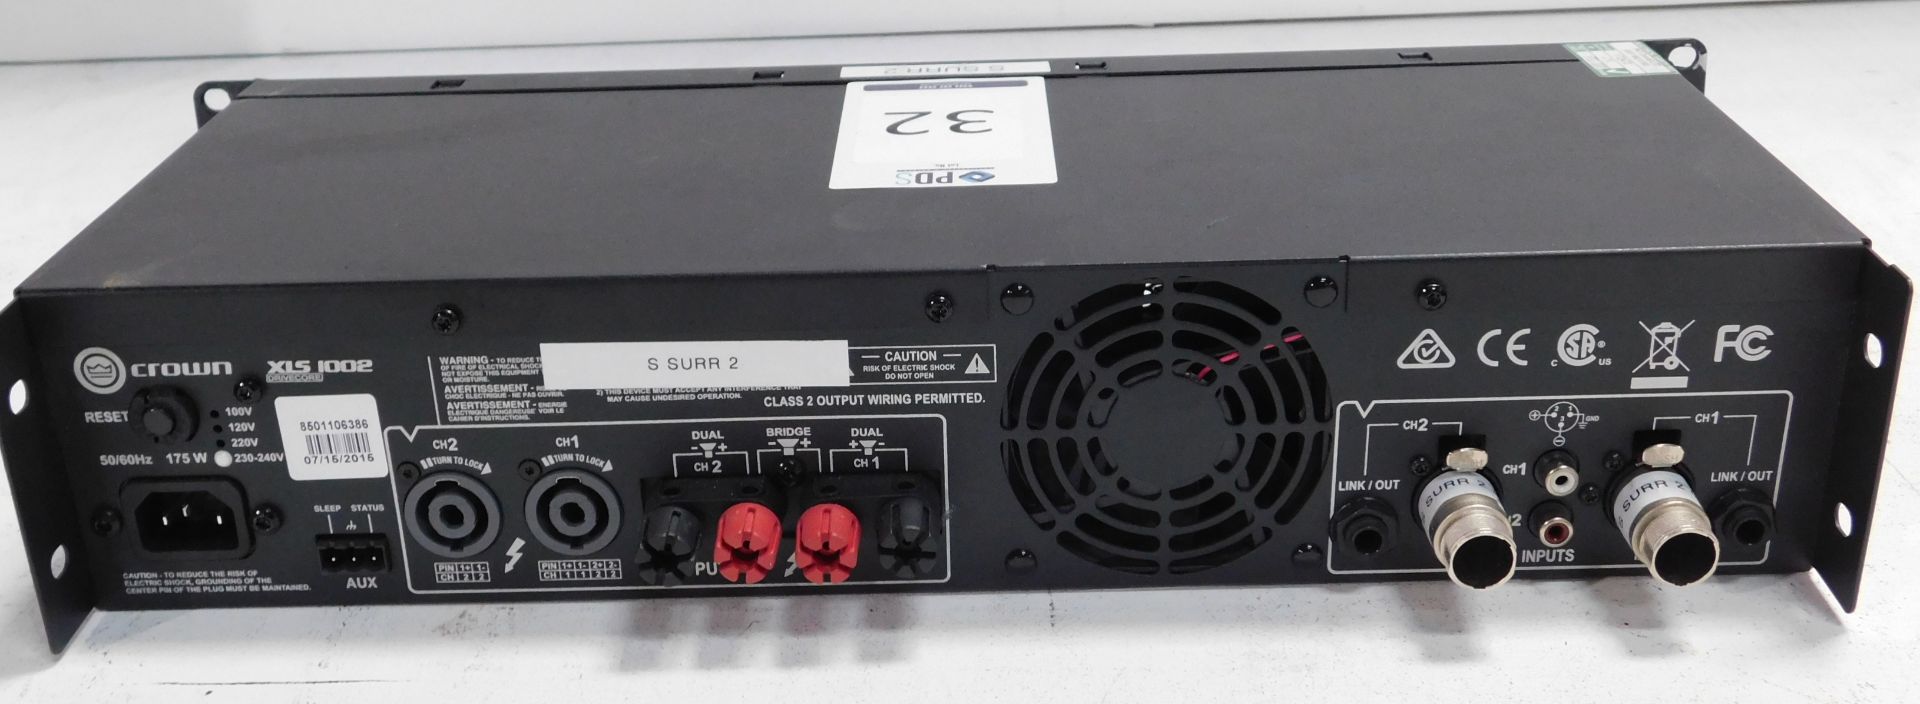 Crown XLS1002 Rack-Mount Power Amplifier (Location Brentwood. Please Refer to General Notes) - Image 2 of 2